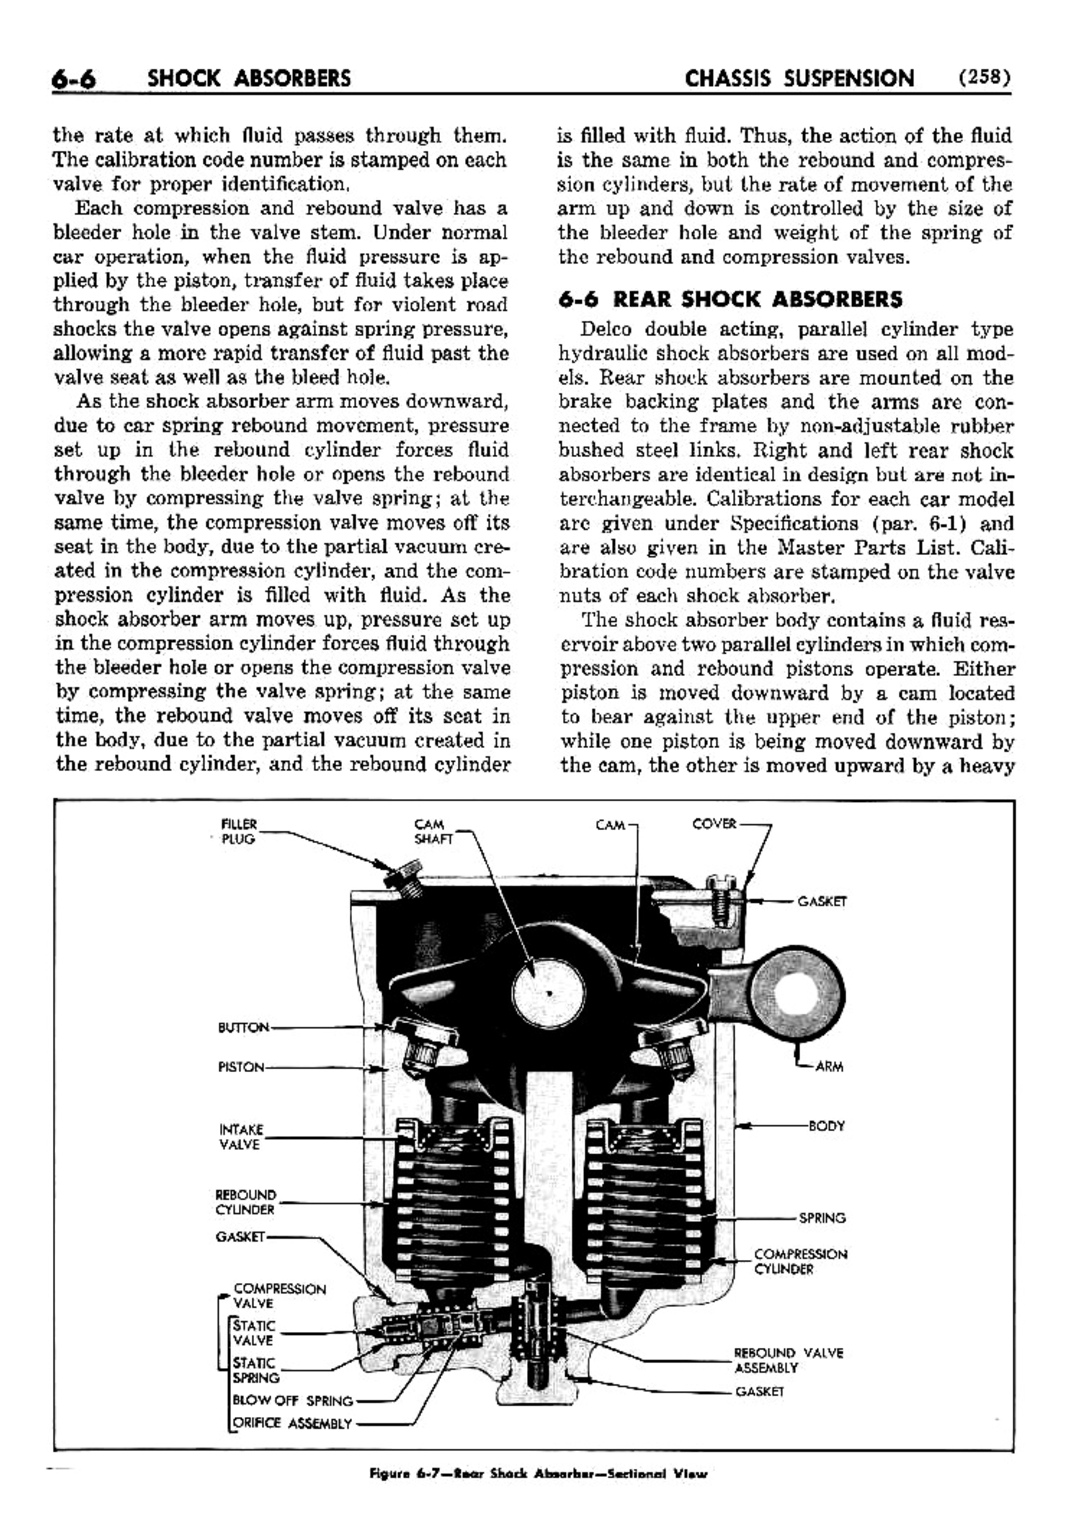 n_07 1952 Buick Shop Manual - Chassis Suspension-006-006.jpg